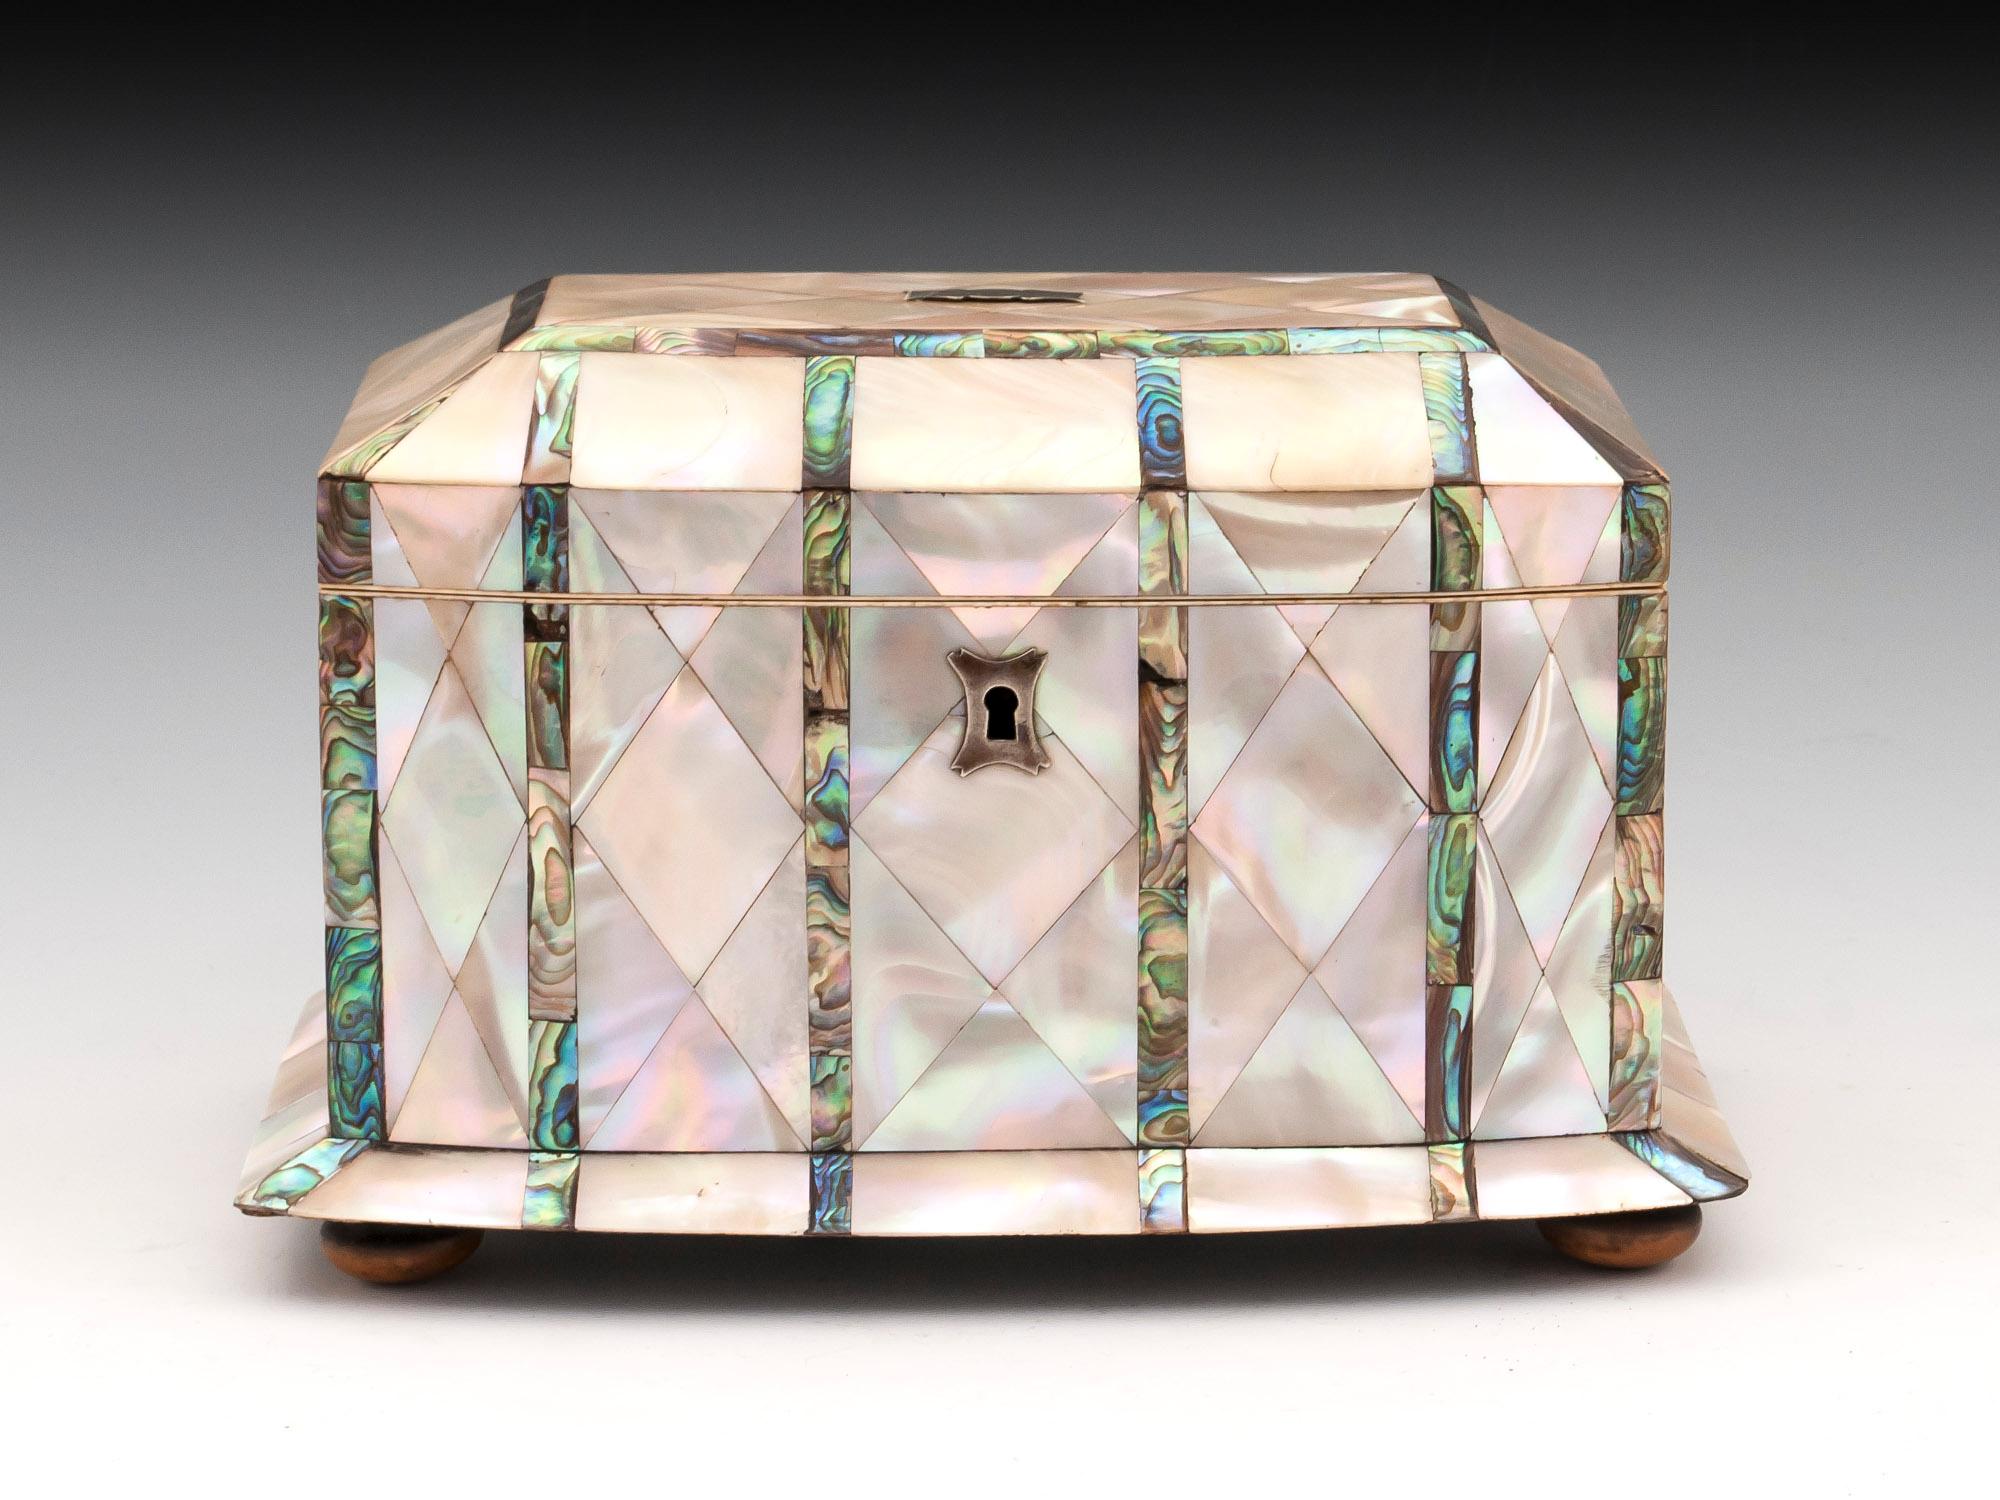 Bow fronted tea caddy with thick mother-of-pearl diamond panels separated by equal bands of abalone. With ornate silver escutcheon and vacant initial plate on the top. The mother-of-pearl tea caddy has a canted top and flared plinth and stands on